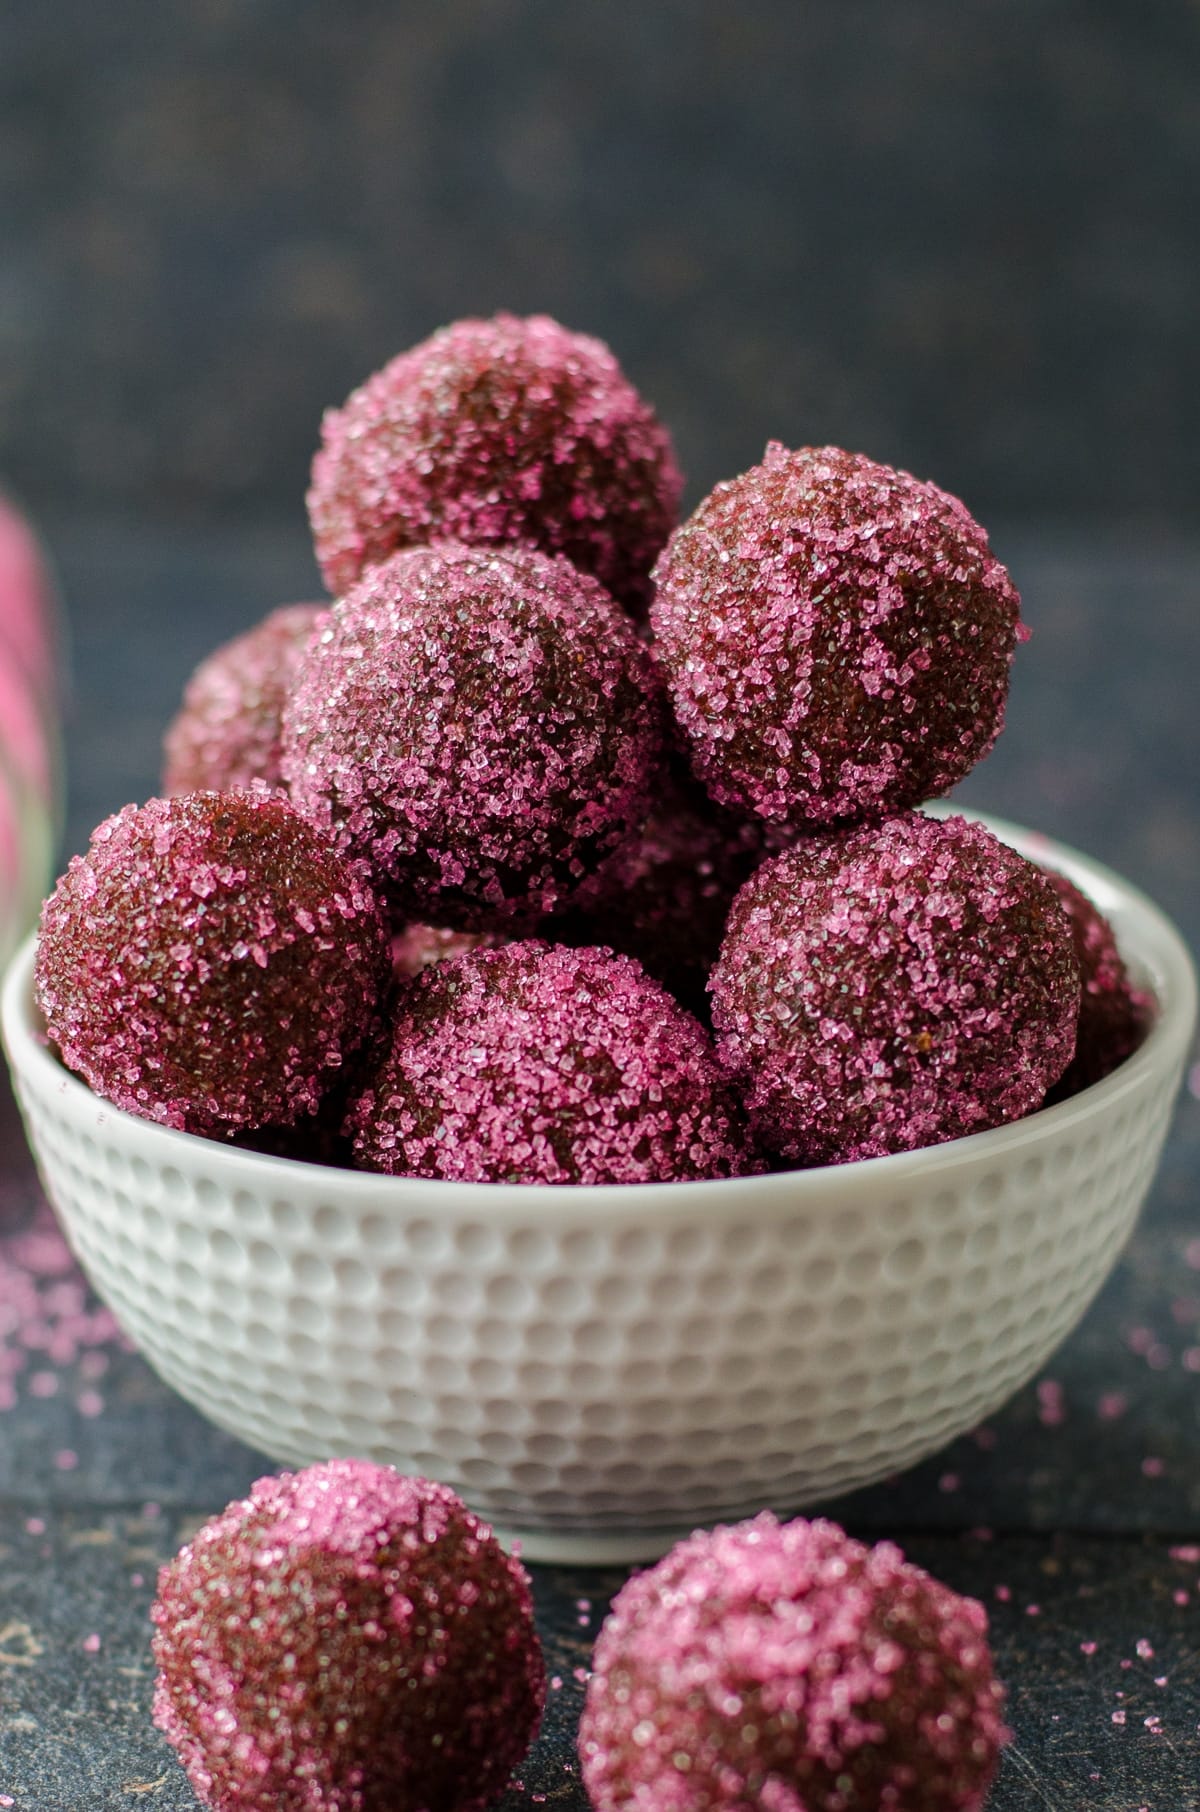 Chocolate truffles with biscuits coated with colored sugar in a white bowl on a dark background.